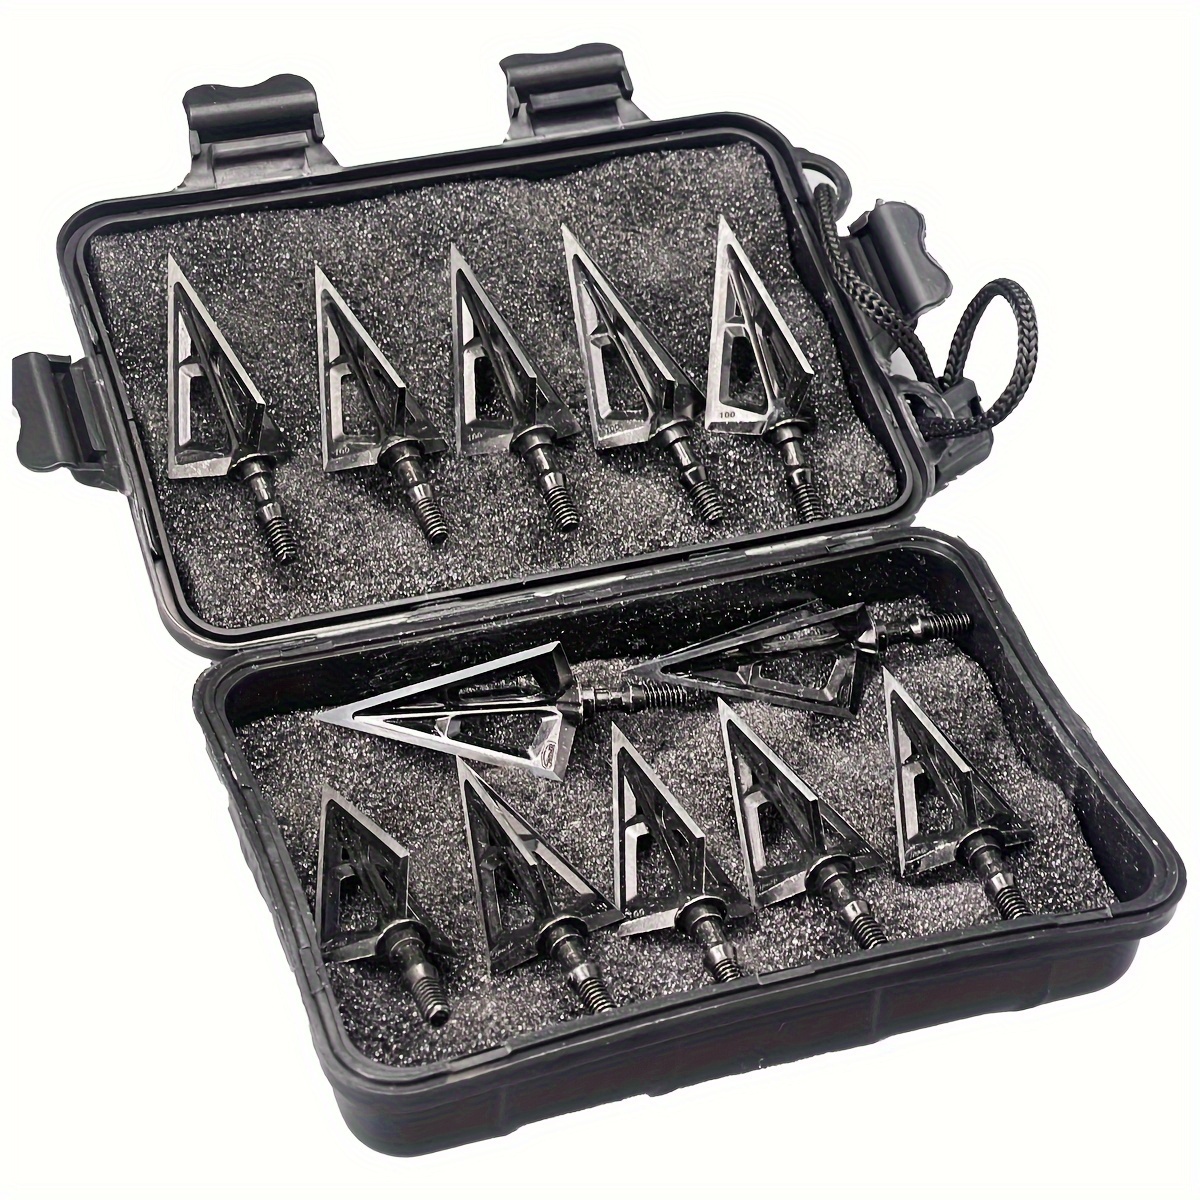 

12pcs Black Archery Broadheads Fixed Blades Stainless Steel Hunting Broadheads For And